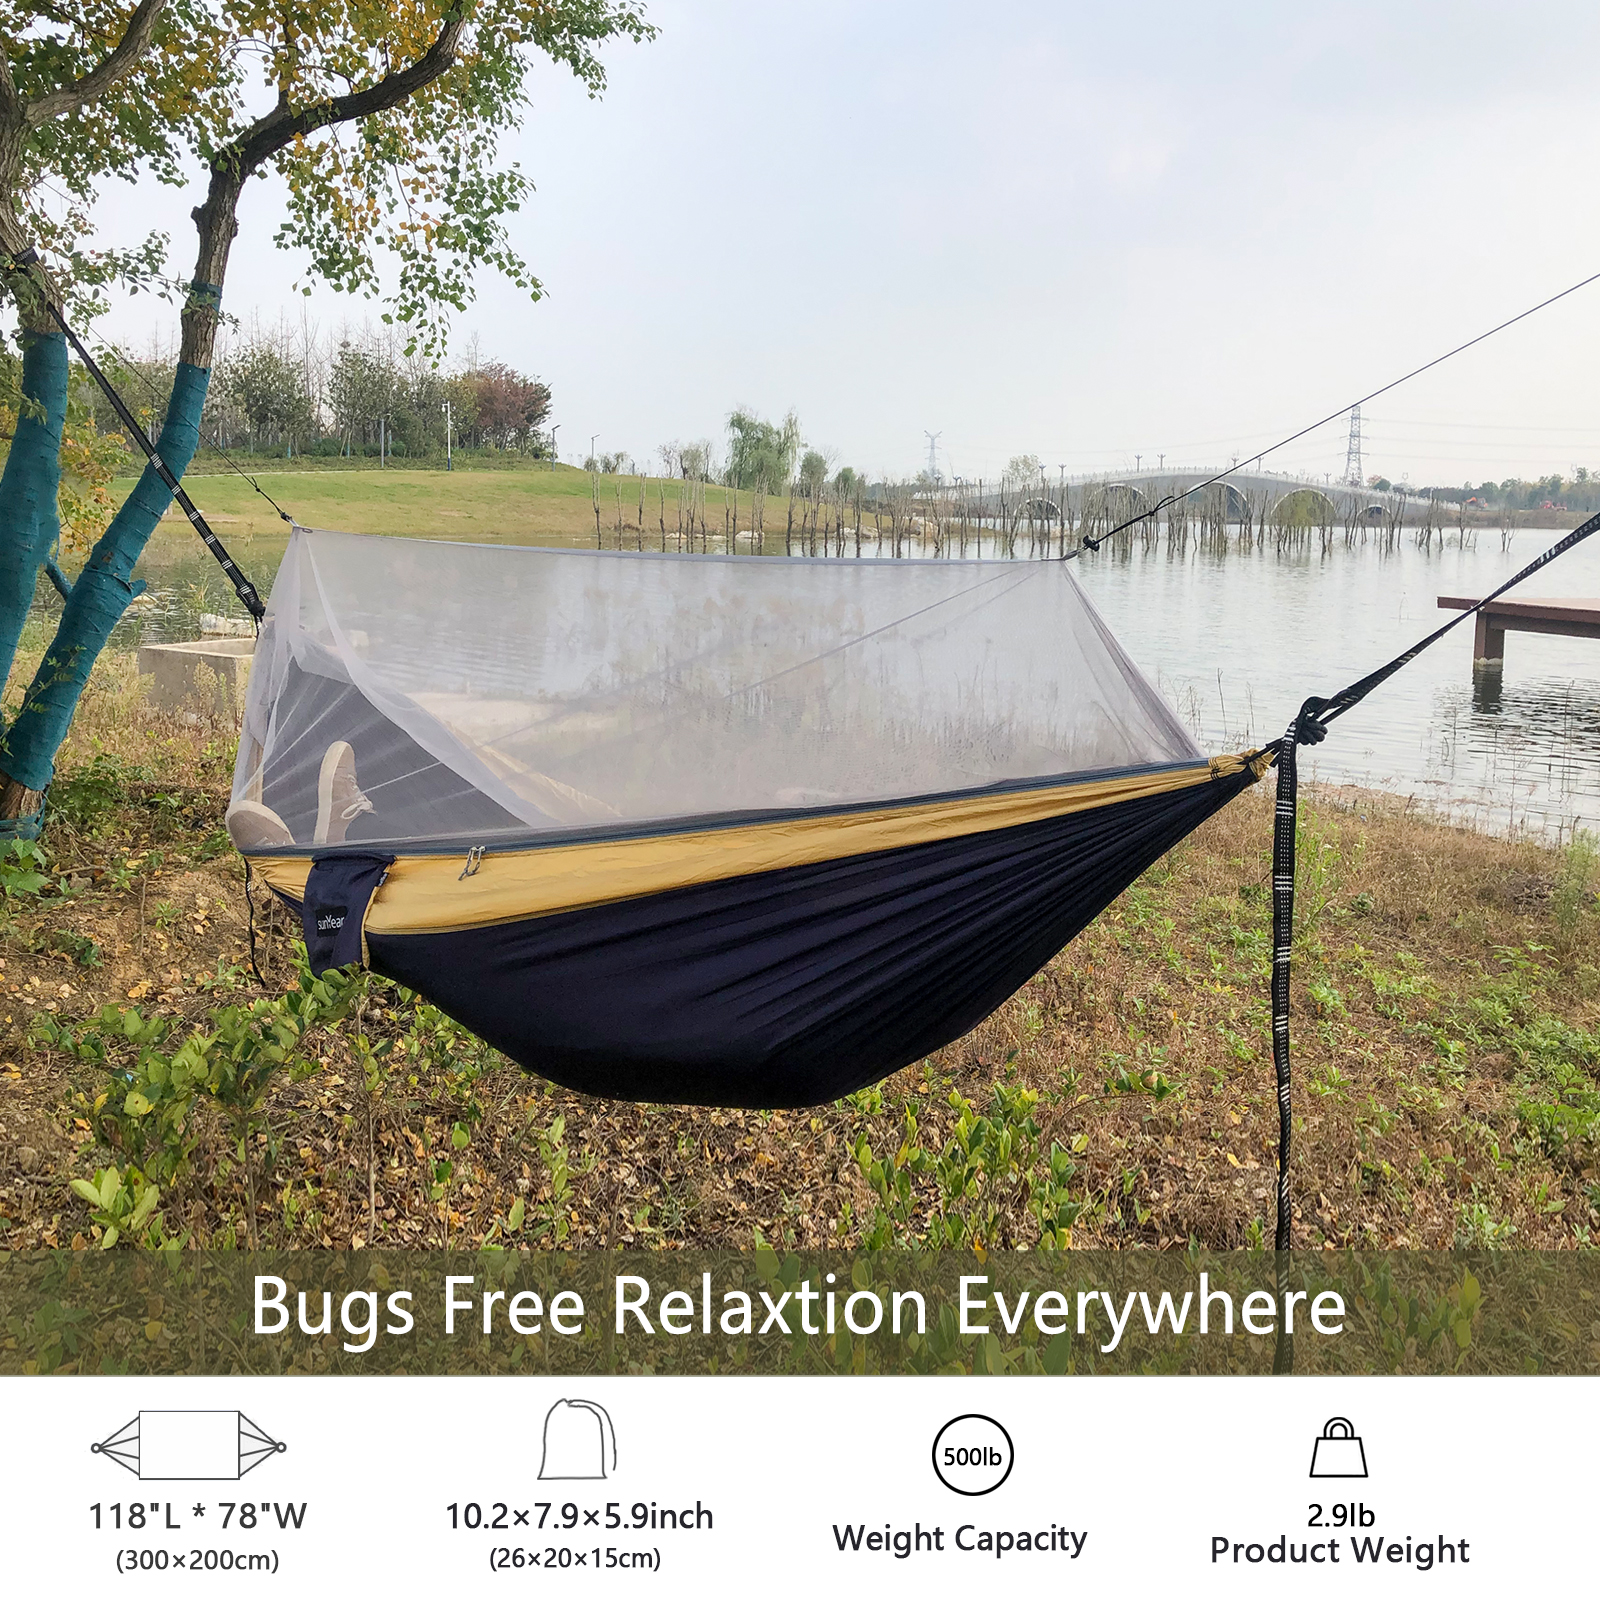 US$ 29.99 - Sunyear Hammock Camping with Net/Netting Mosquito & 2